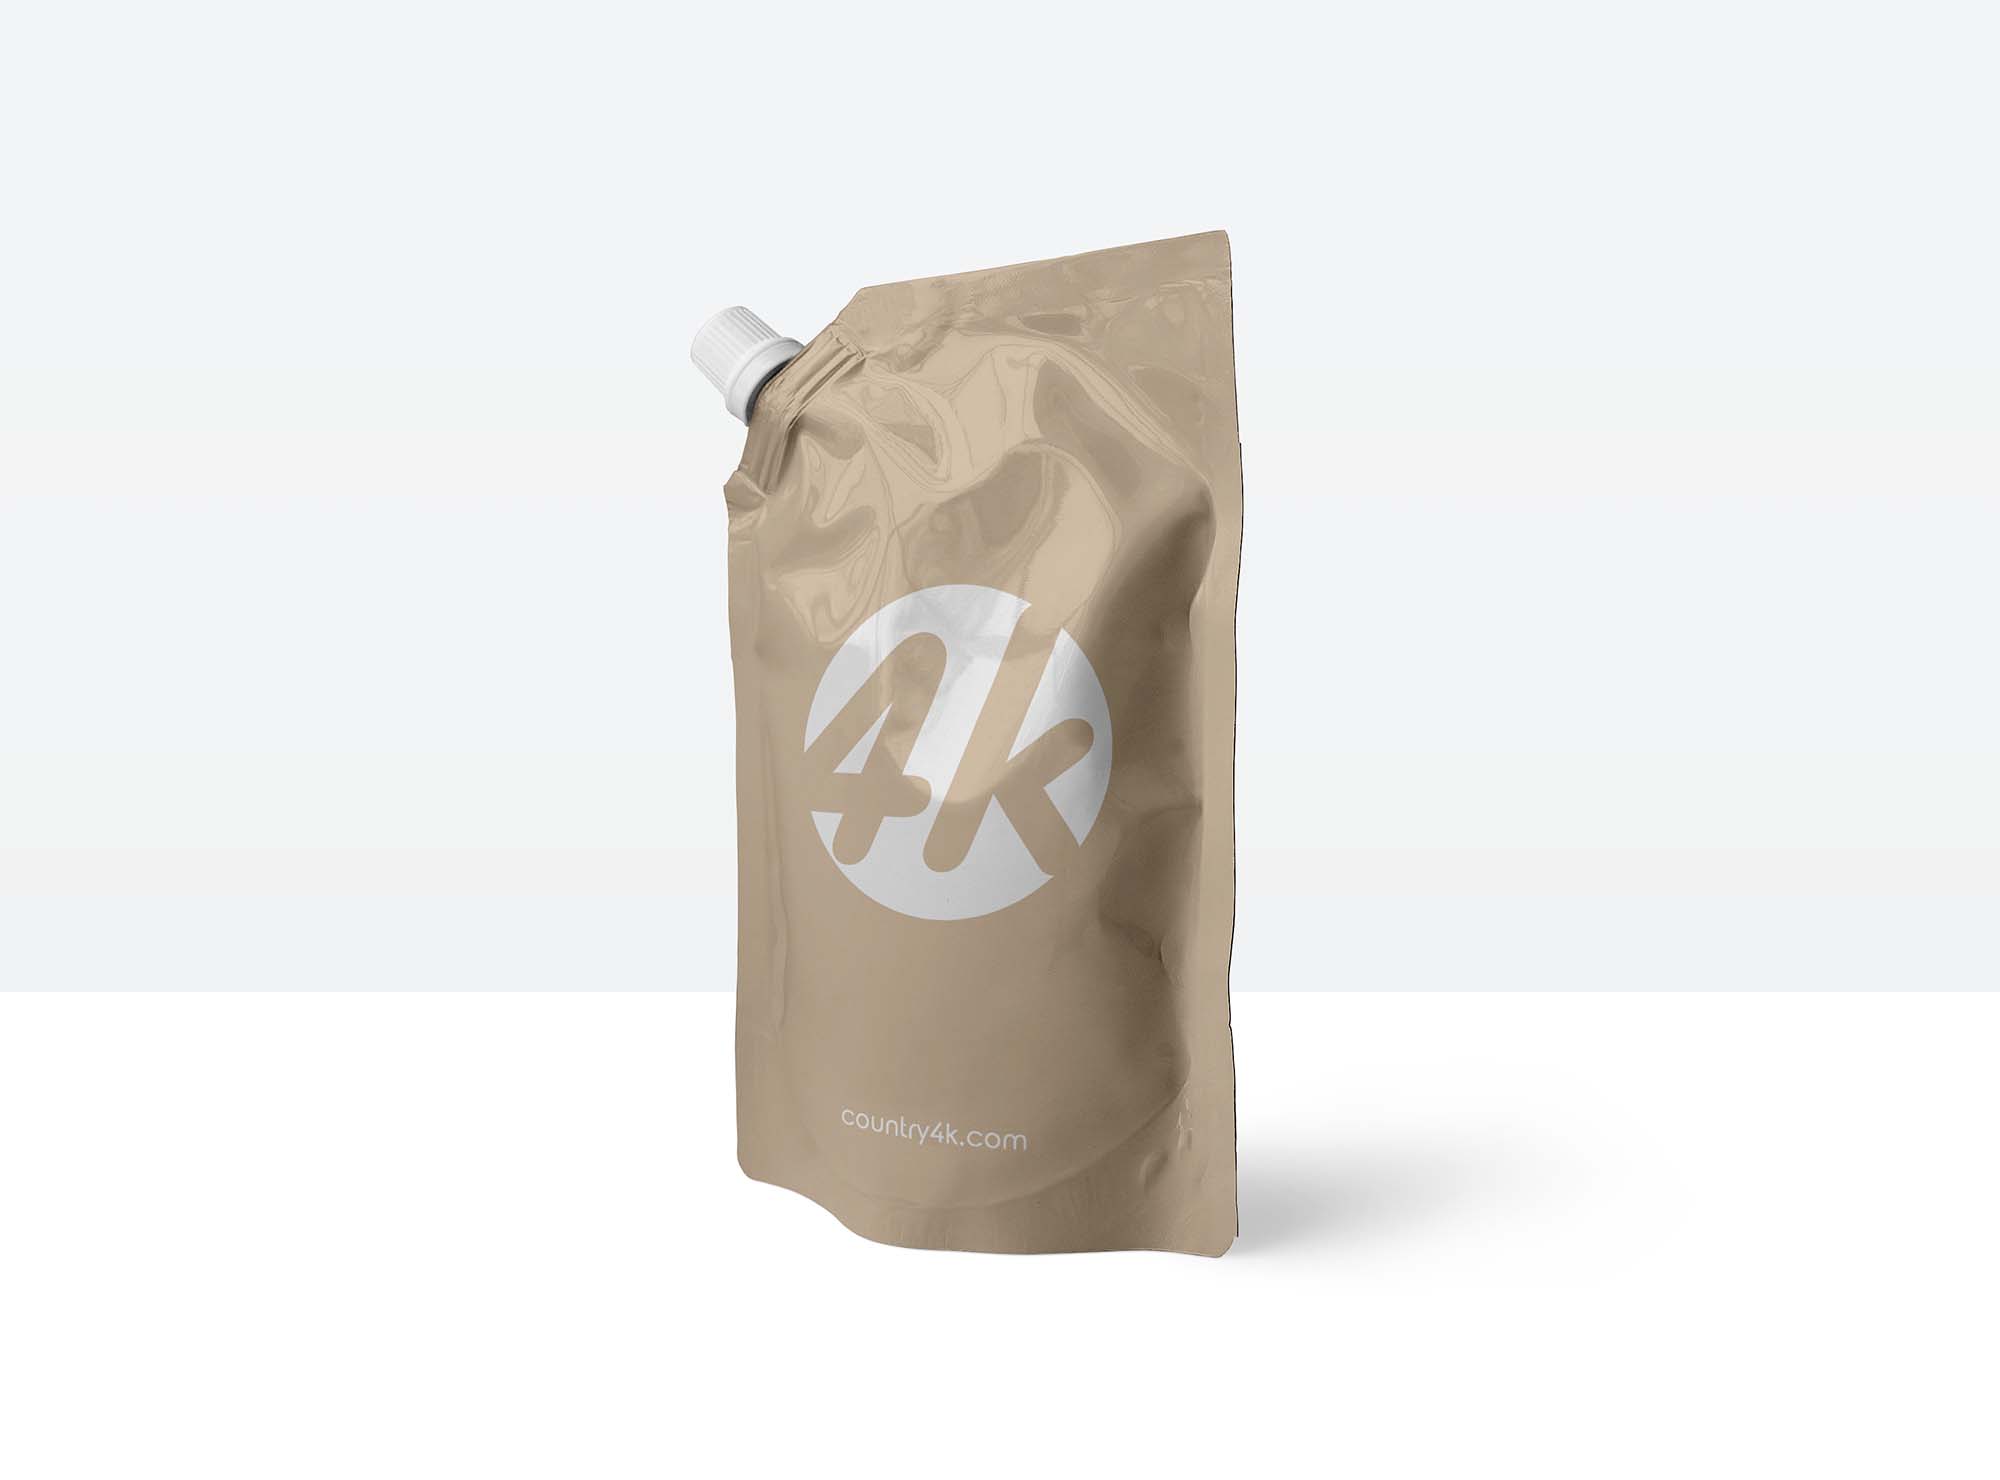 Download Doypack Foil Bag PSD Mockup (Free) by Country 4K